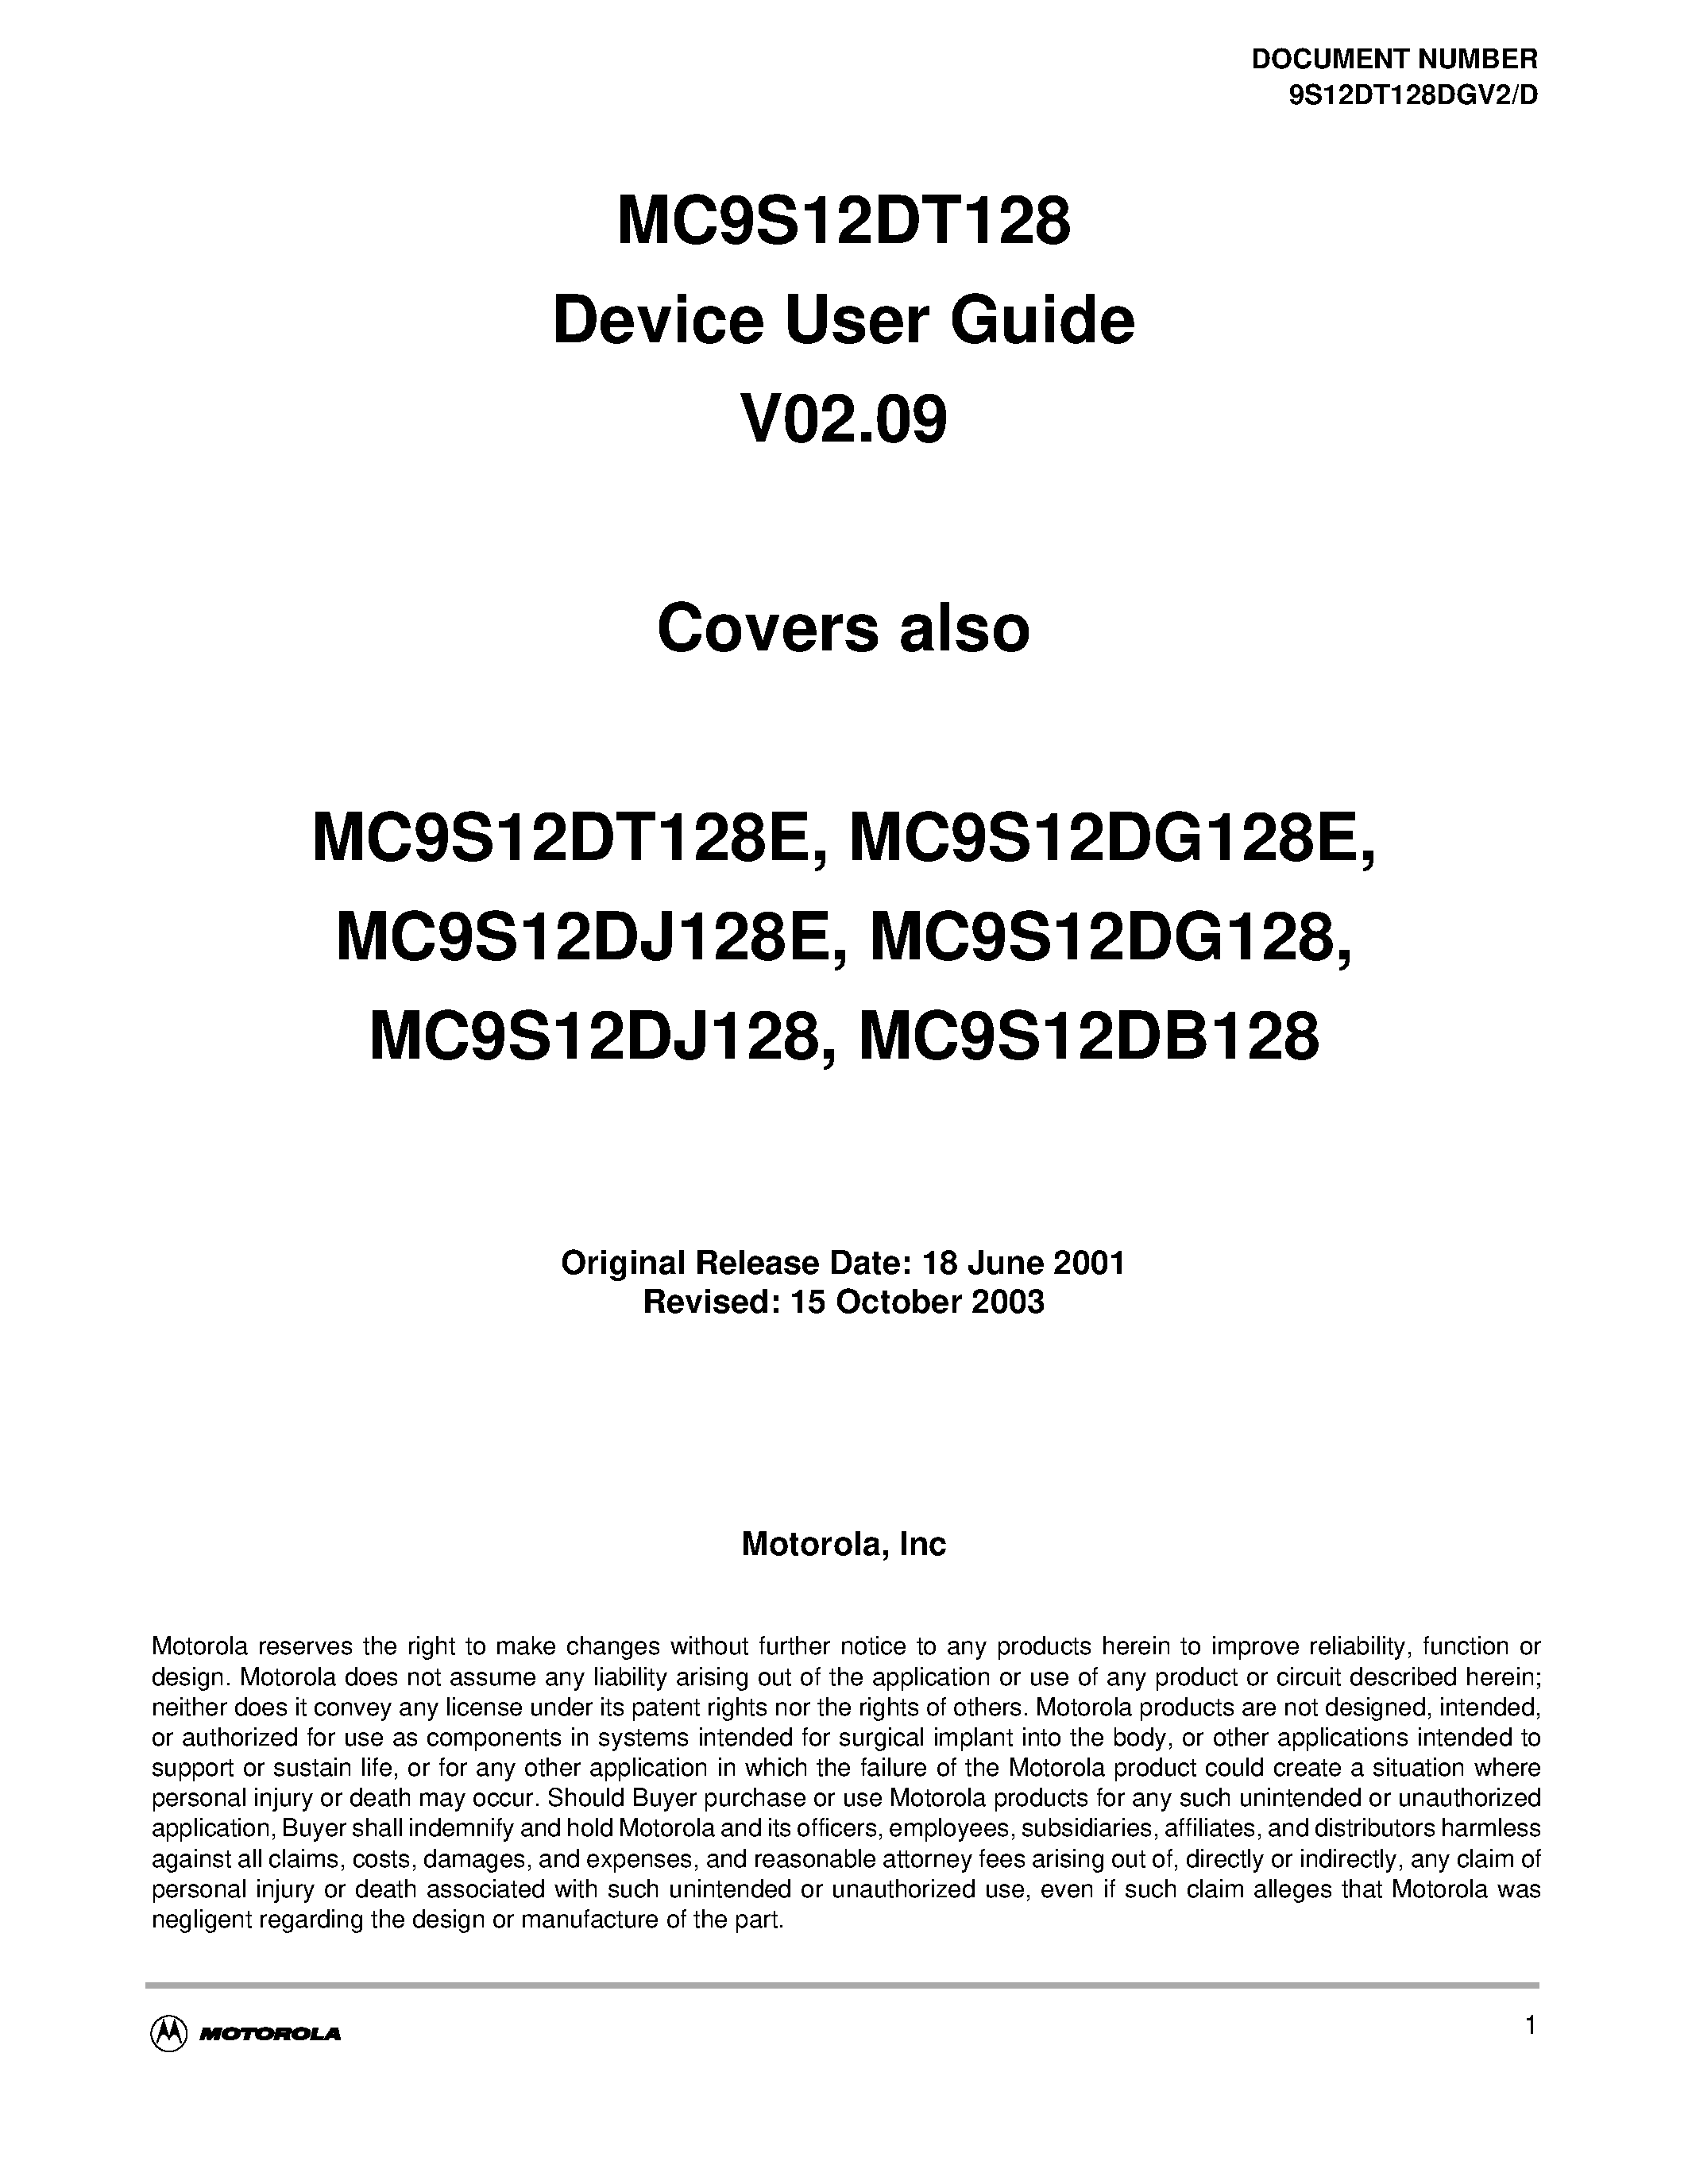 Datasheet S12IICV2D - MC9S12DT128 Device User Guide V02.09 page 1